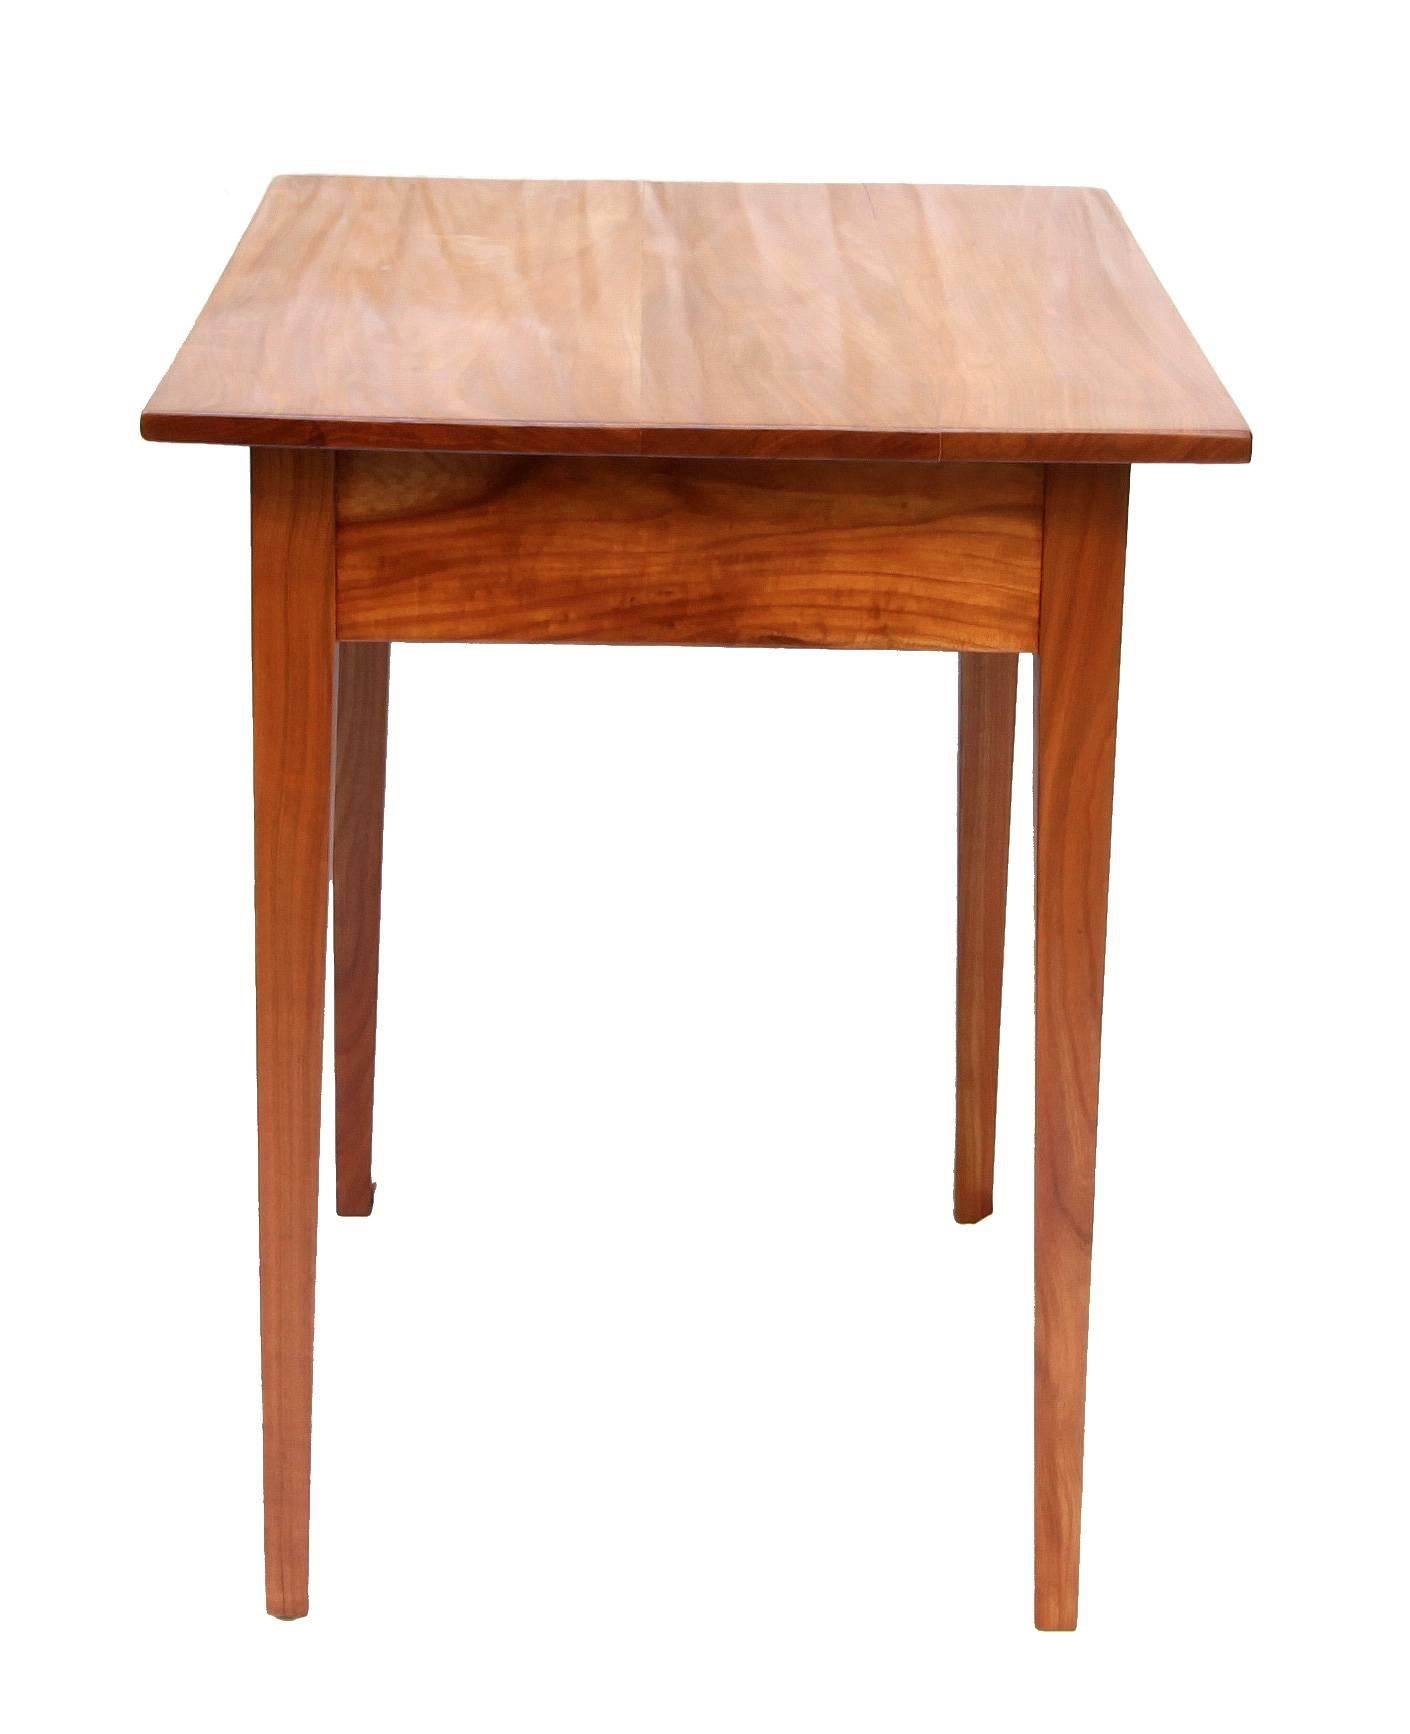 The side table is made of solid cherrywood and has a wonderful timeless design, dates back to the time of Biedermeier, circa 1825. The drawer is, as usual, made of pine wood, the panel of cherry.